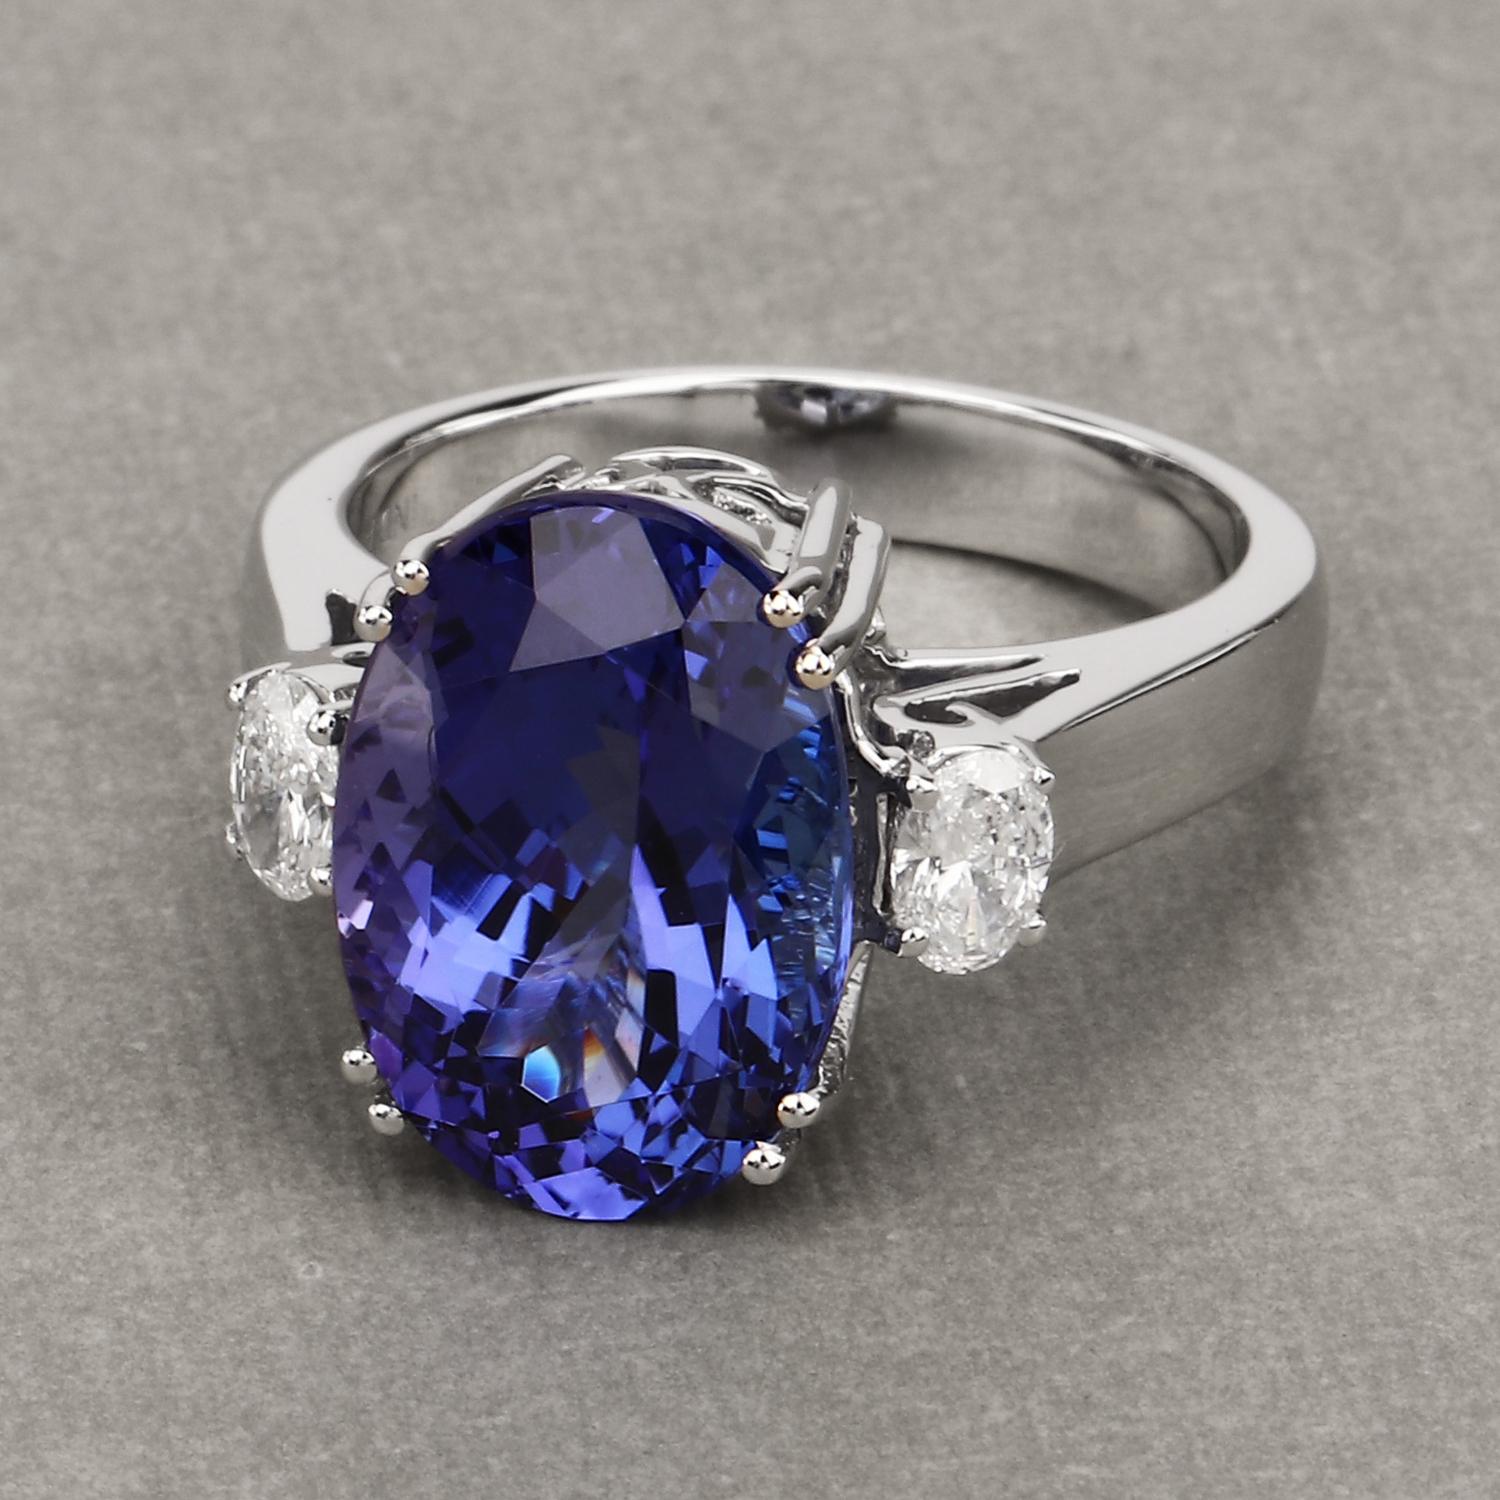 9.18 Carat Genuine Tanzanite and White Diamond 18 Karat White Gold Ring In New Condition For Sale In Great Neck, NY